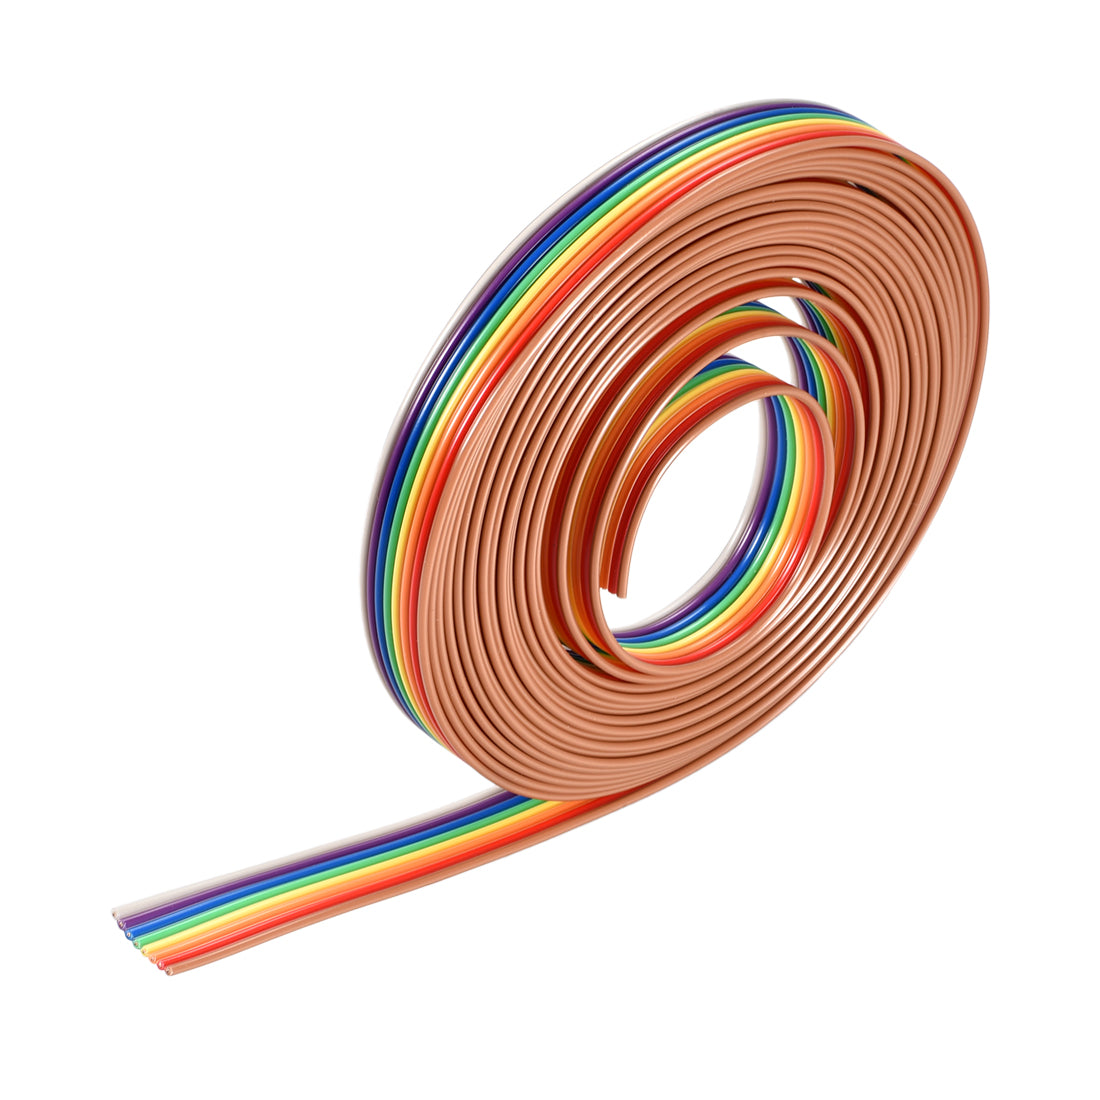 uxcell Uxcell IDC Rainbow Wire Flat Ribbon Cable 8P 1.27mm Pitch 3meter/9.8ft Length